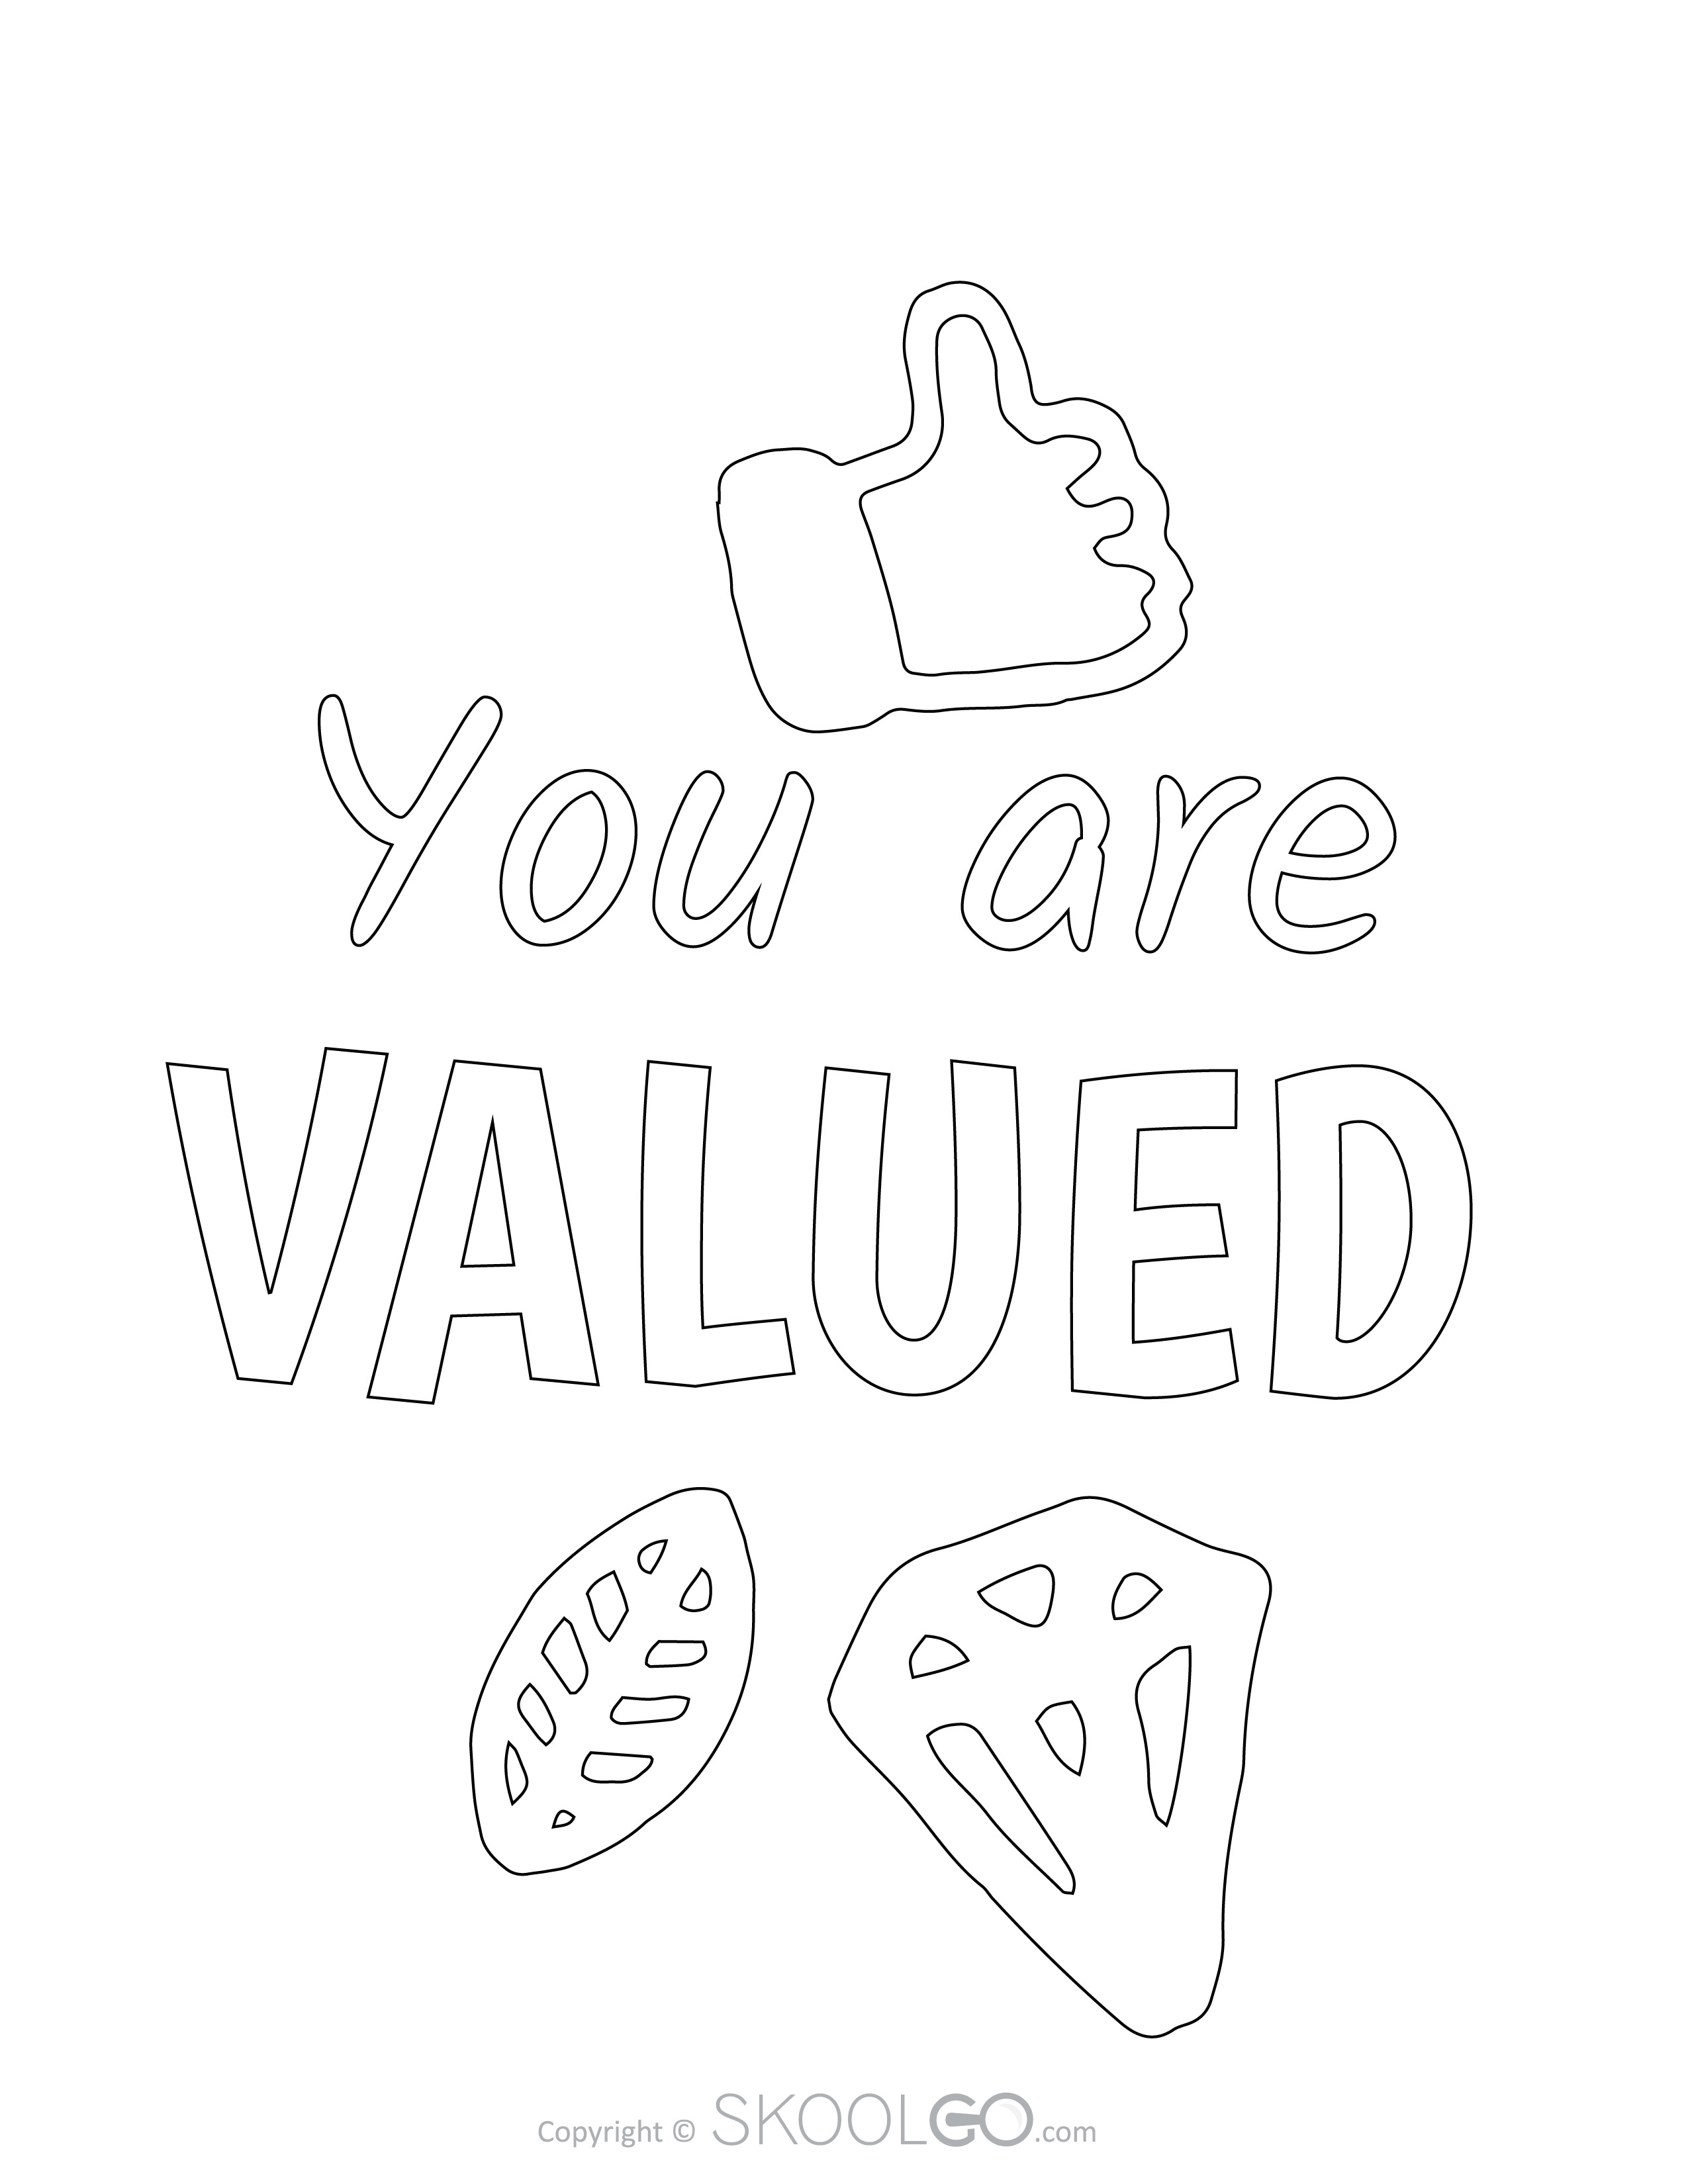 You Are Valued - Free Coloring Version Poster